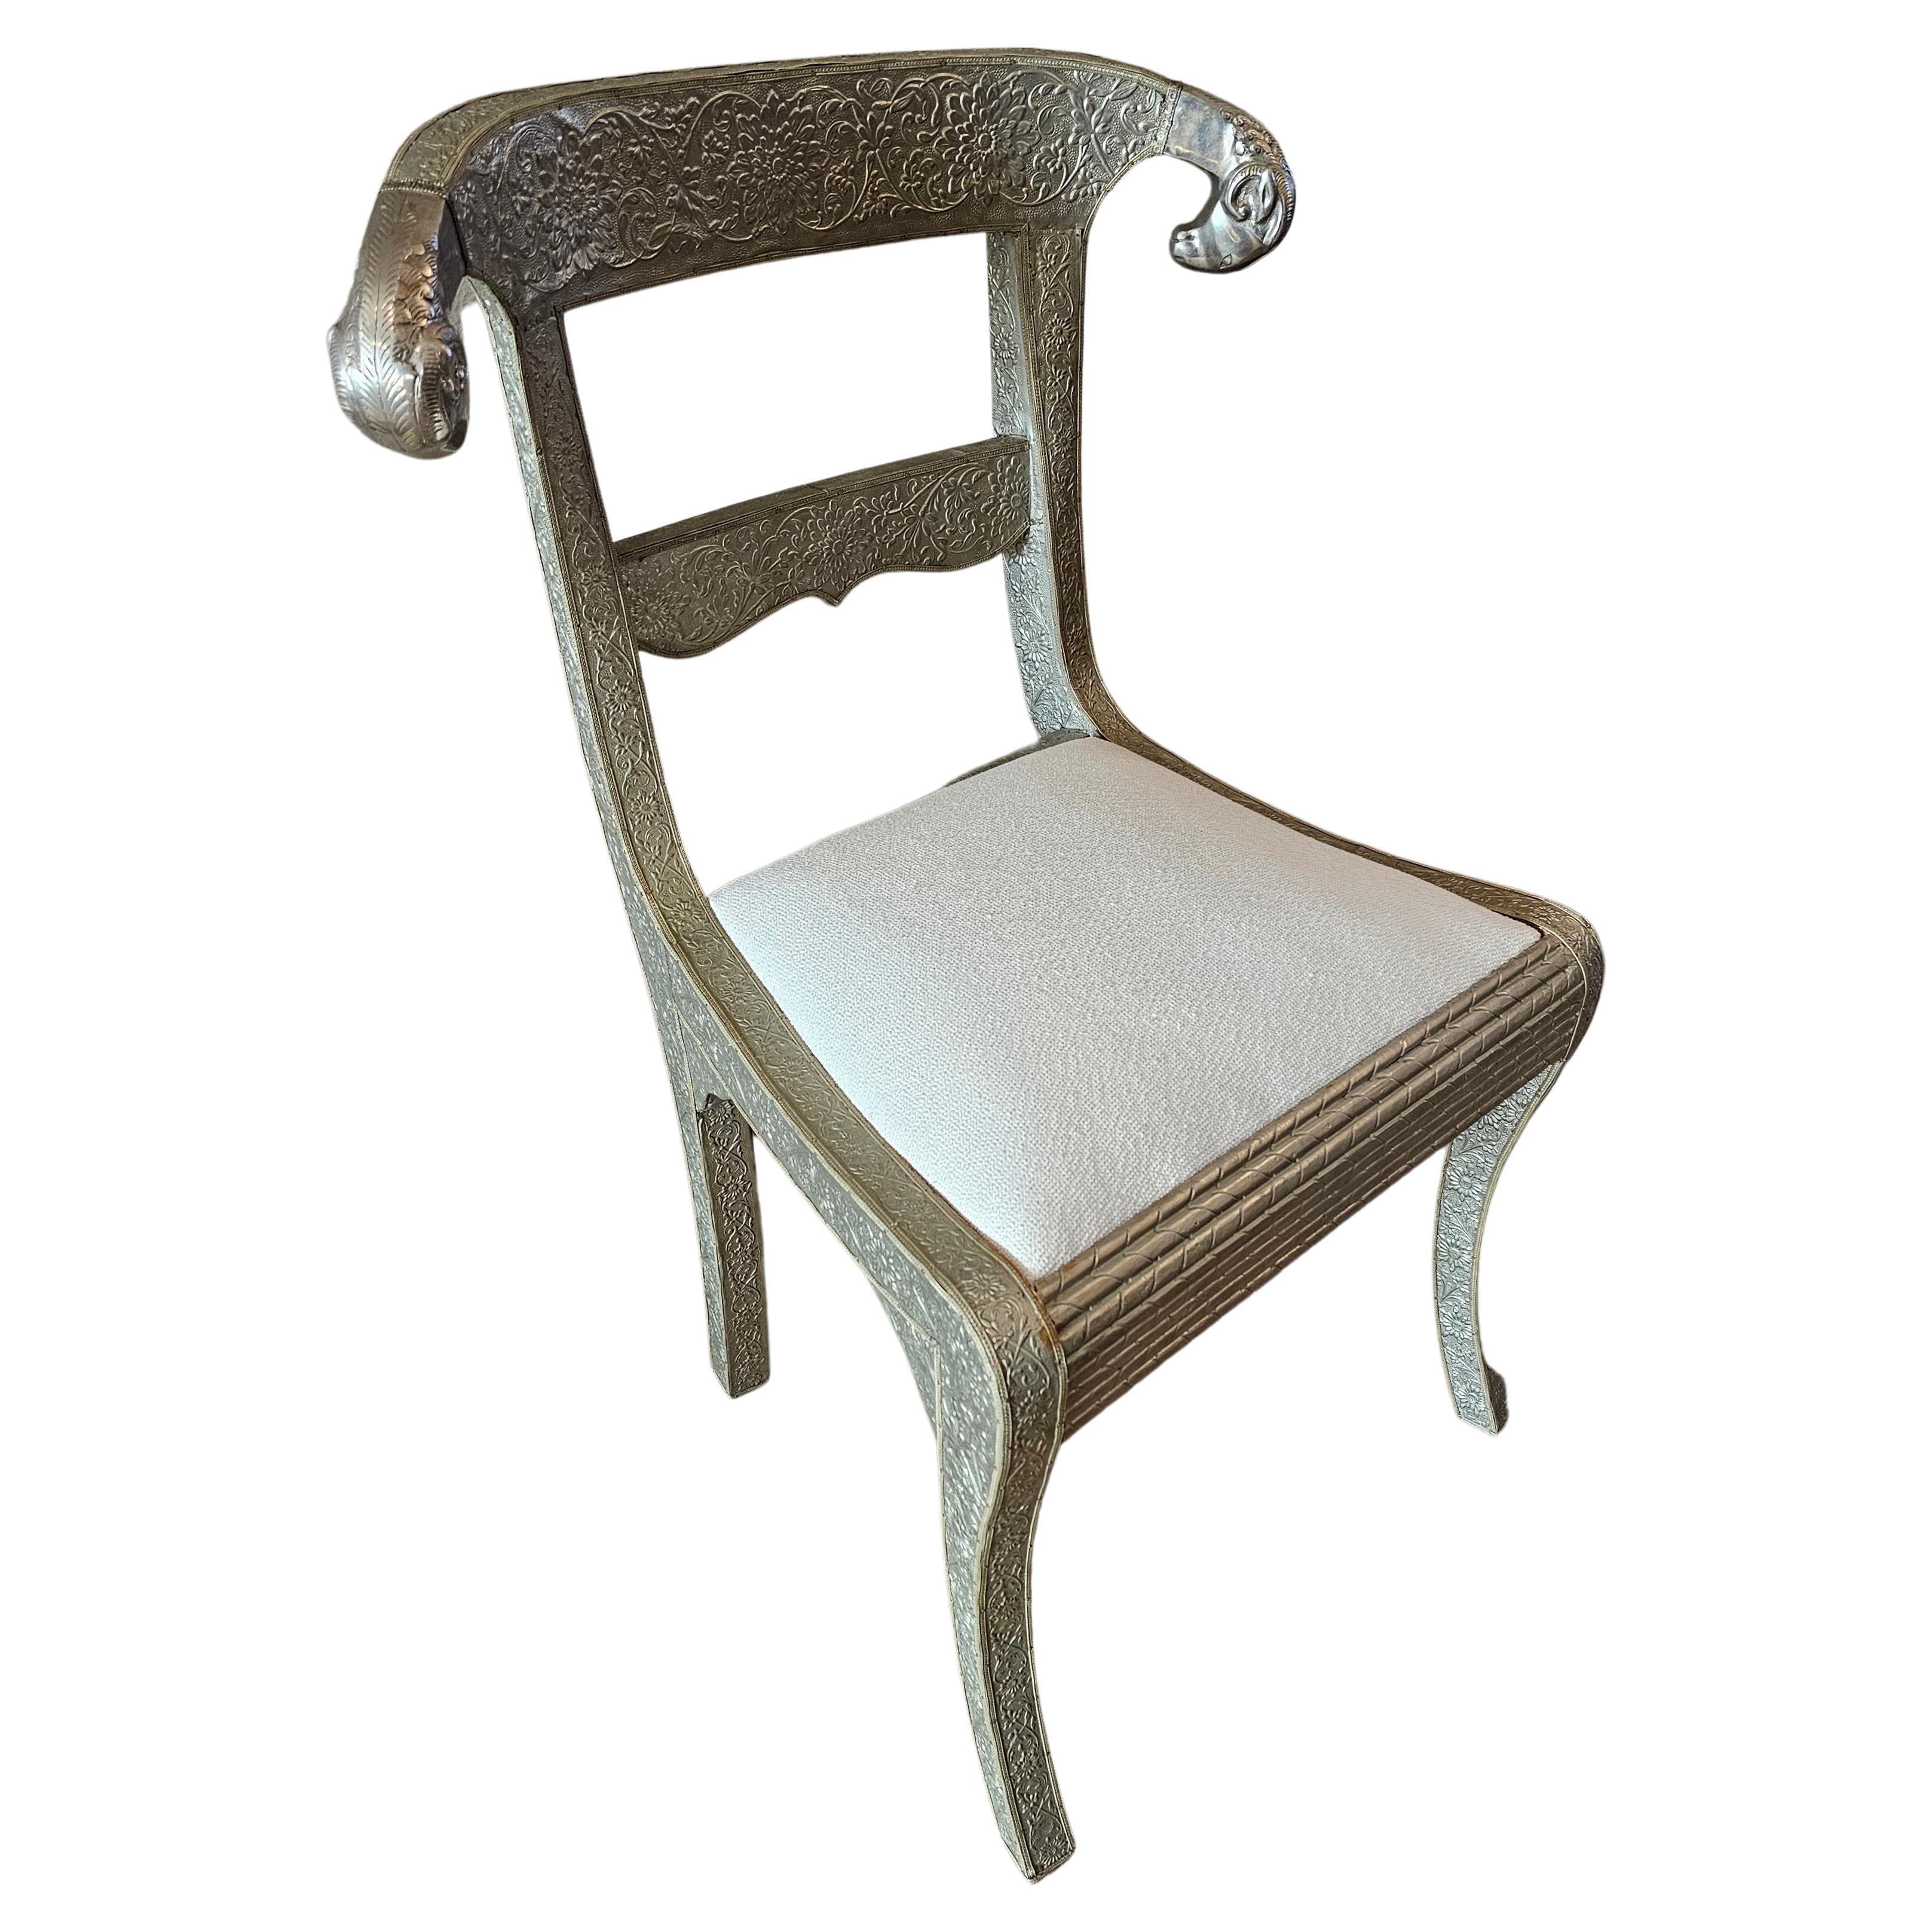 Anglo-Indian Silvered Metal-Clad Chair For Sale